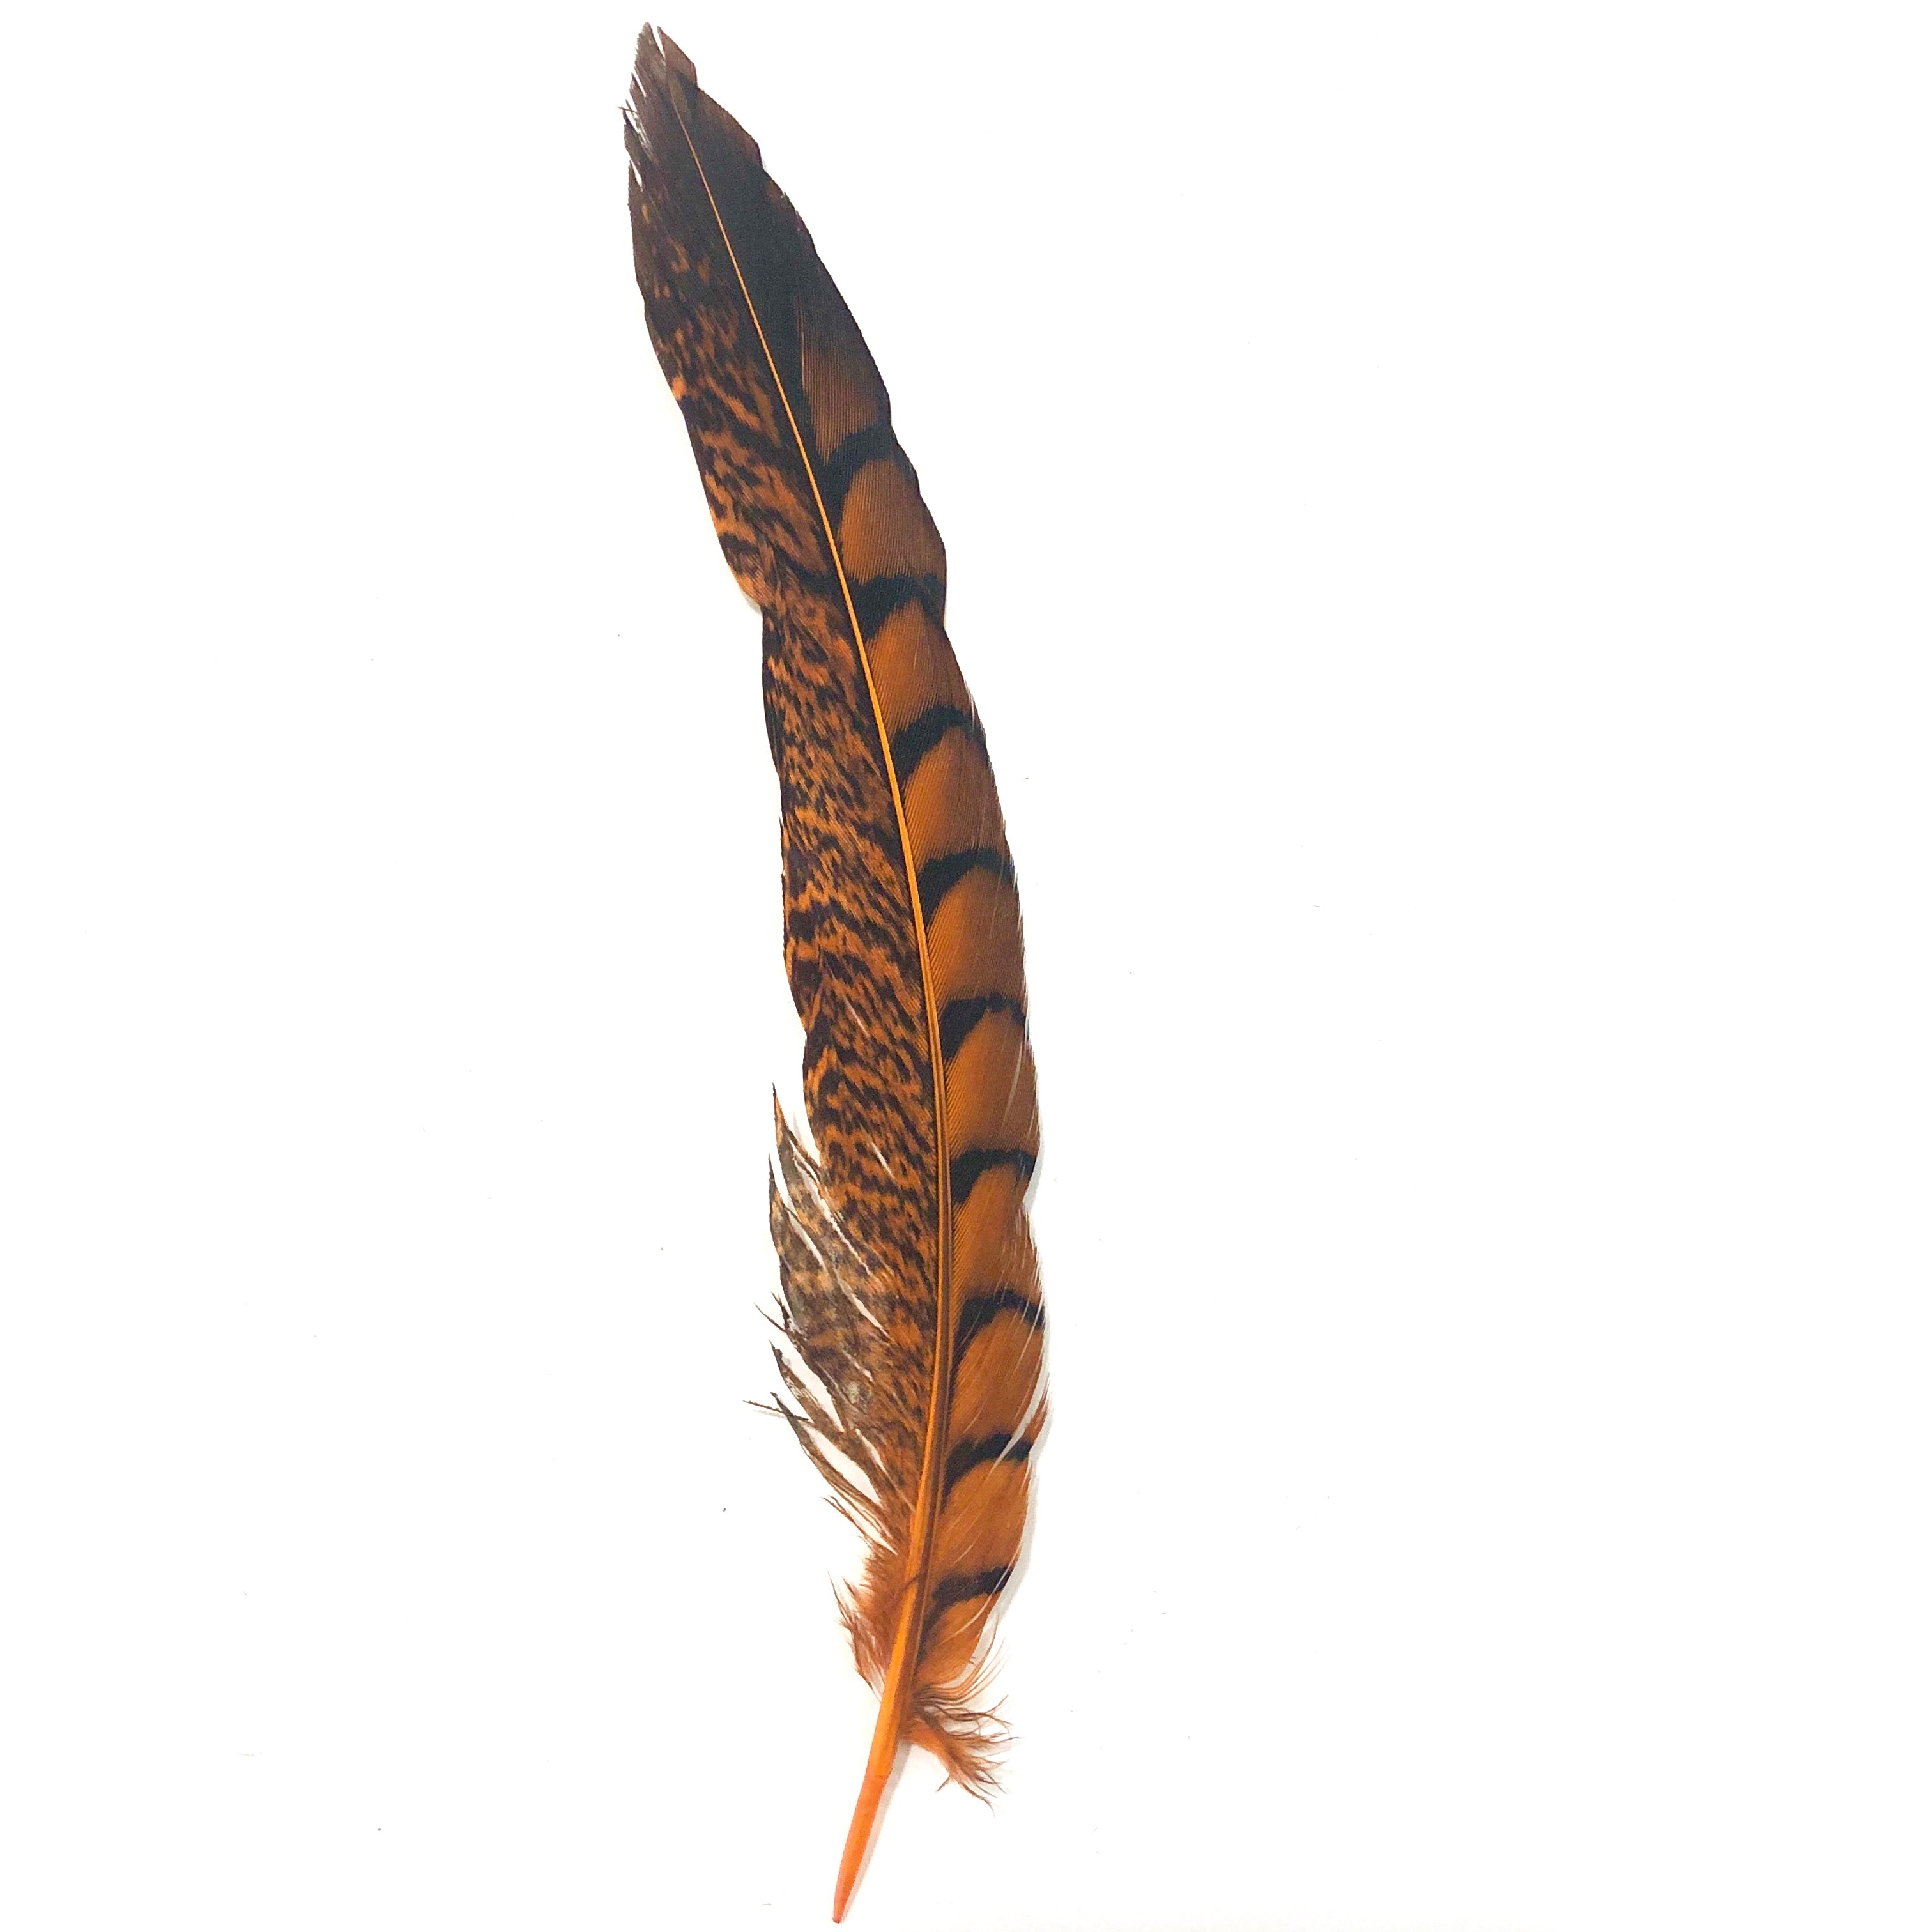 5" to 10" Lady Amherst Pheasant Side Tail Feather x 10 pcs - Orange